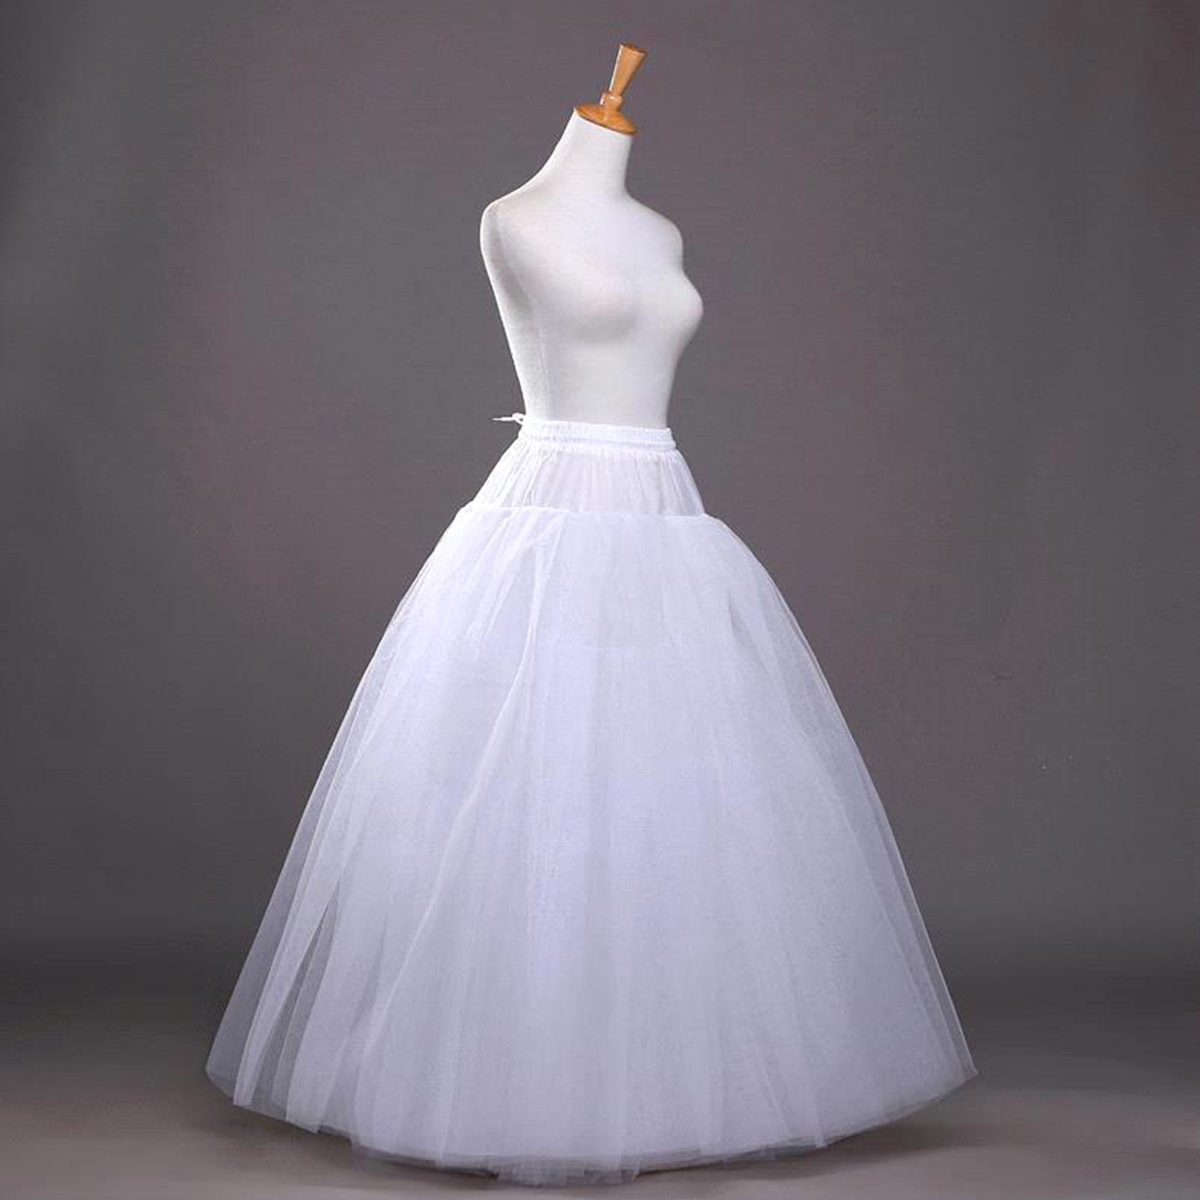 Choosing a petticoat for your wedding gown